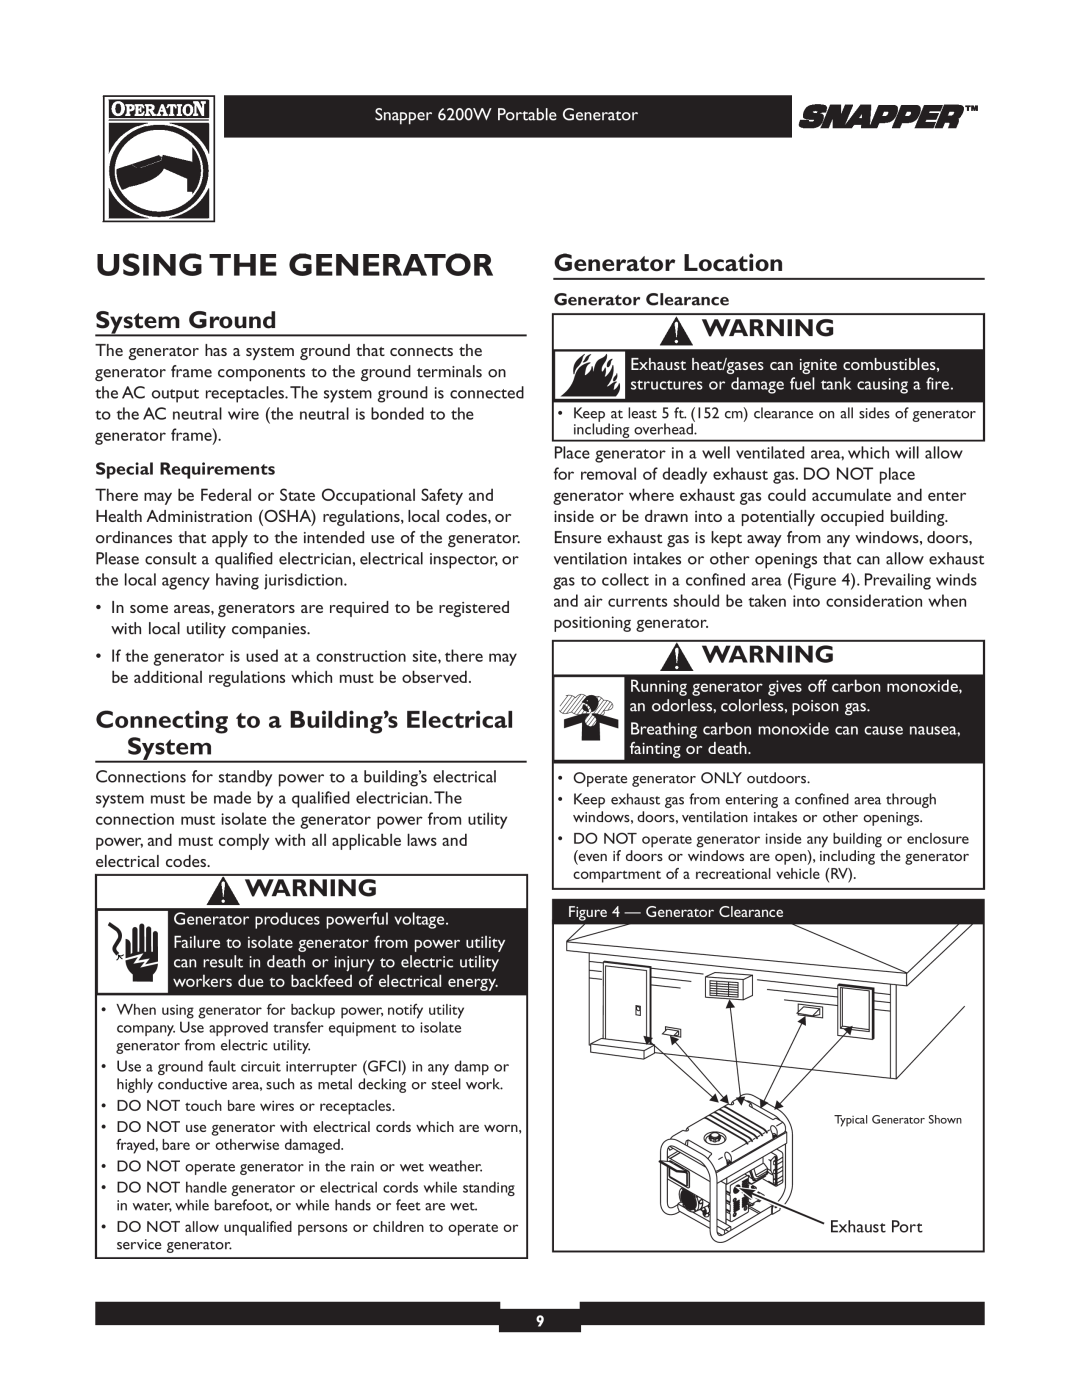 Snapper 30216 manual Using The Generator, System Ground, Connecting to a Building’s Electrical System, Generator Location 